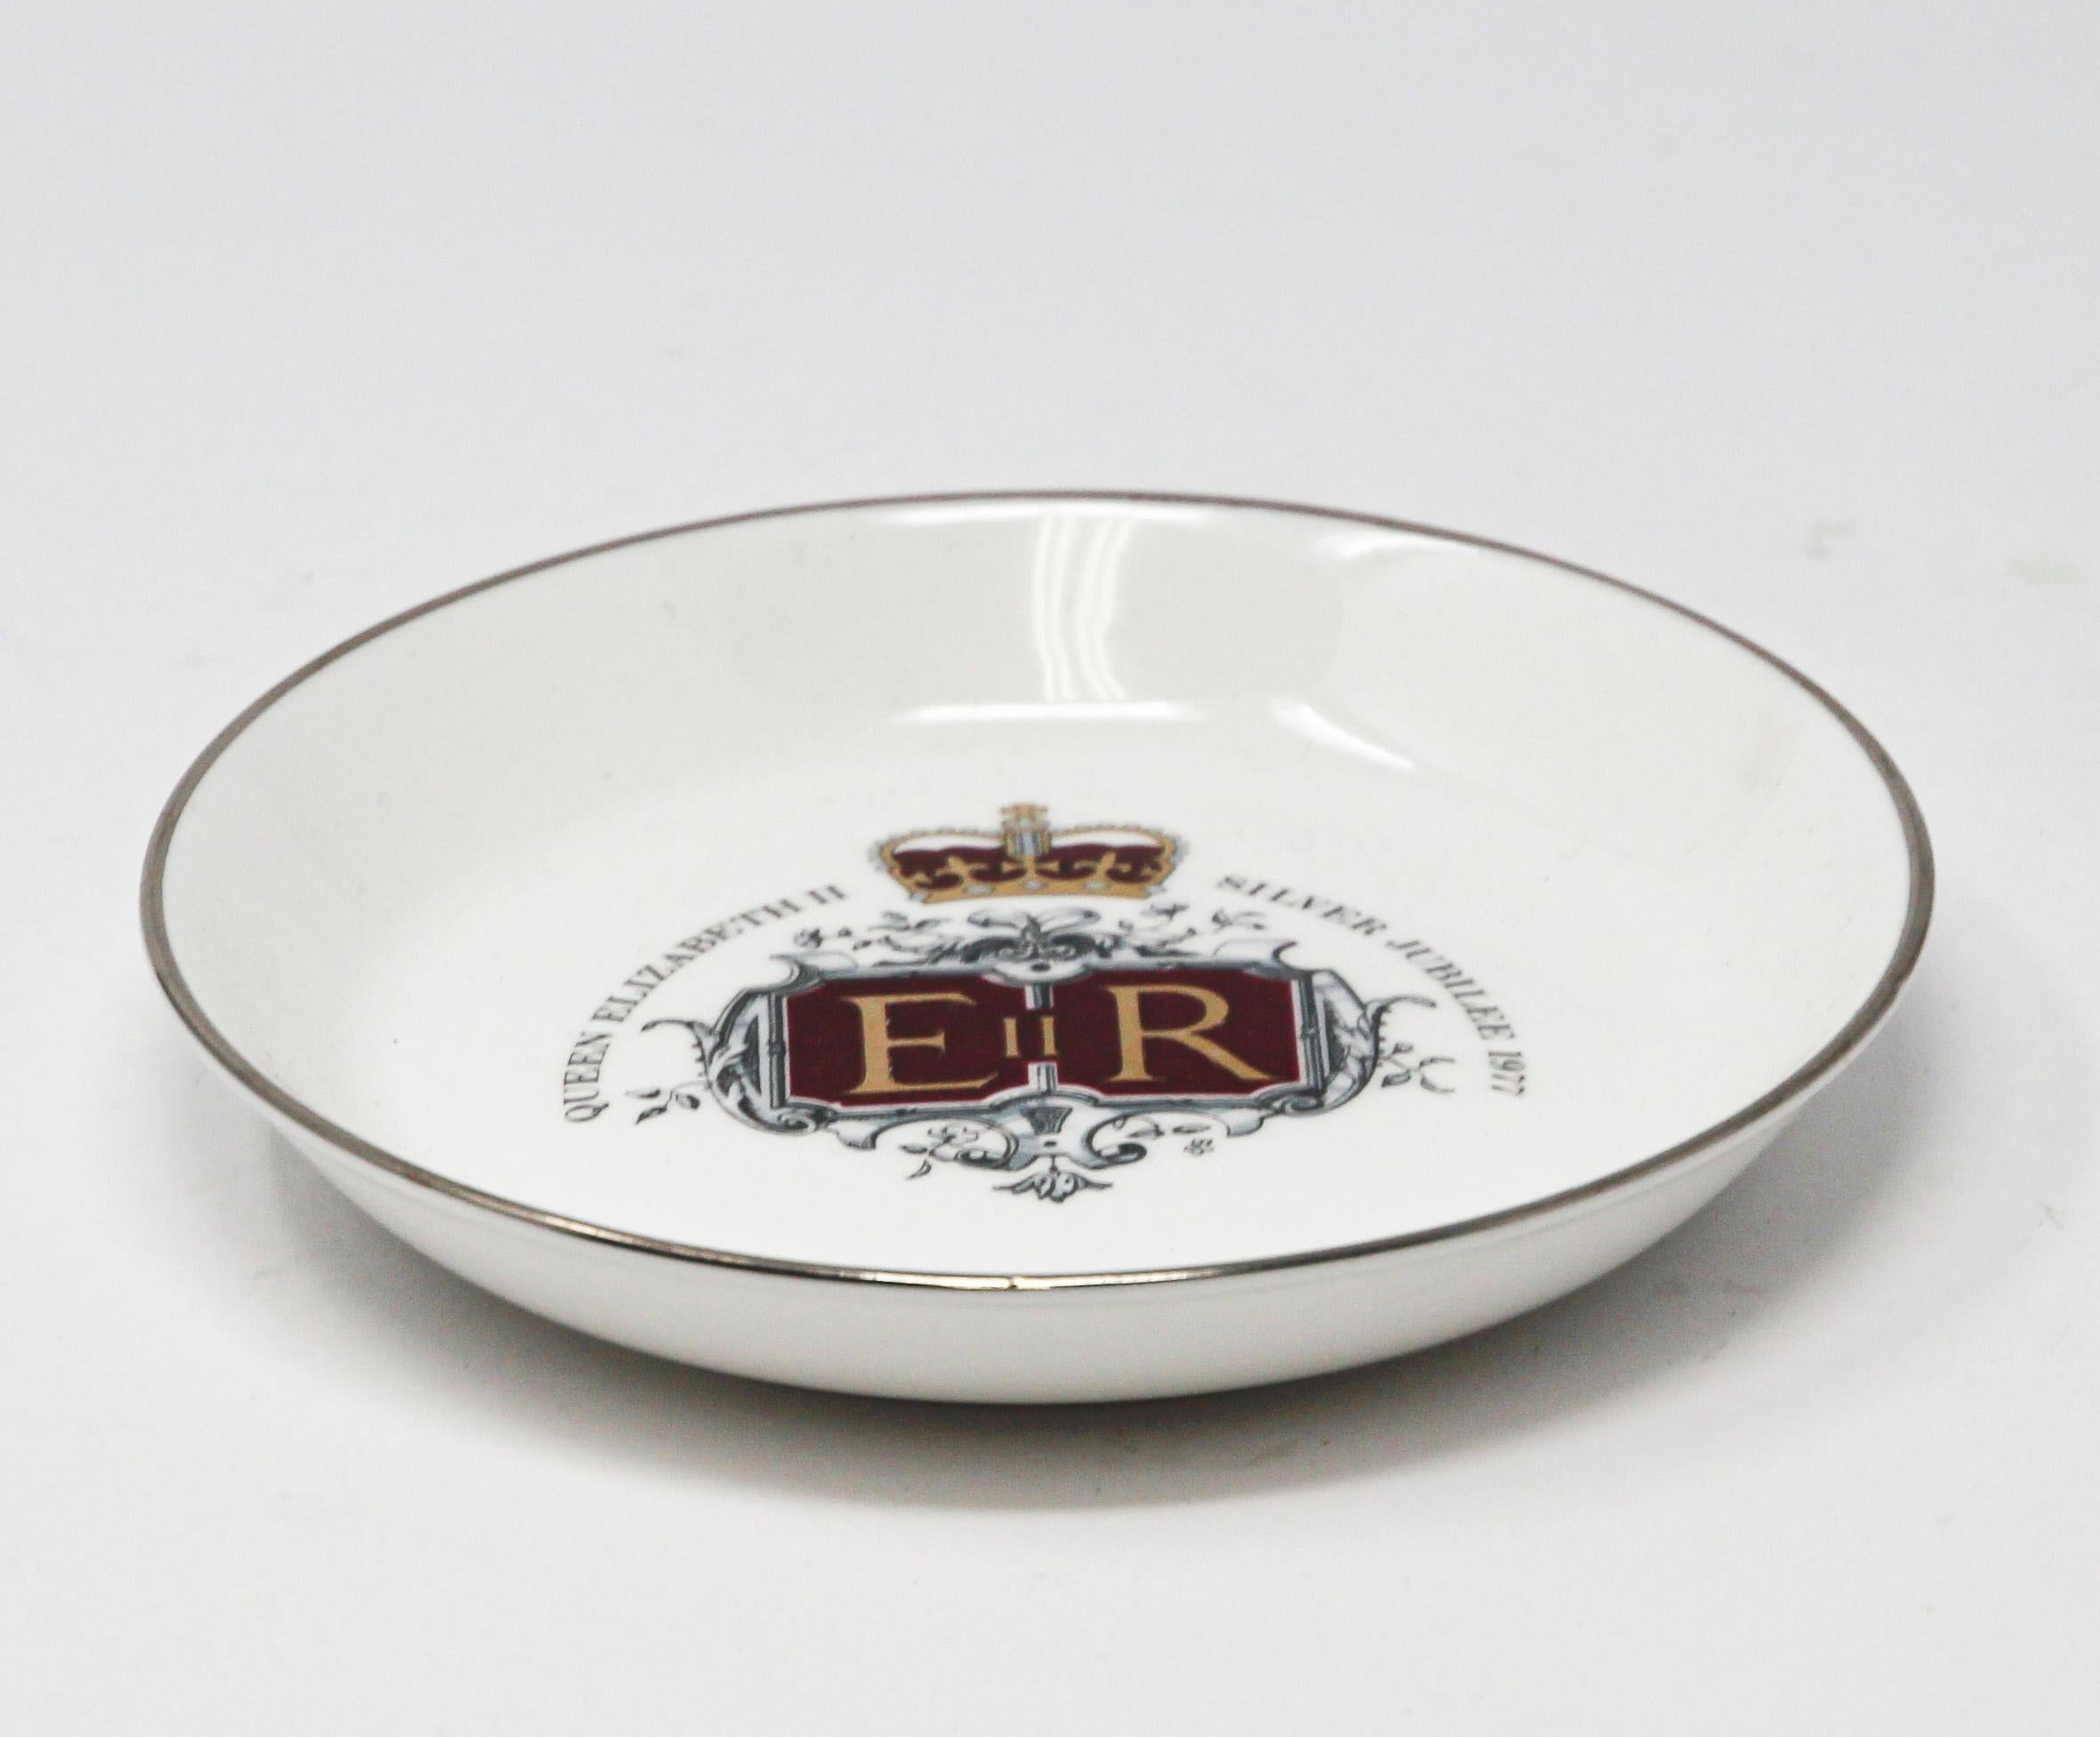 Vintage Queen Elizabeth II silver jubilee porcelain plate by Hammersley.
Fine bone China made in England.
The catchall dish measures 5 inches in diameter.
Great to use as a vide poche or on a desk.
British collector porcelain plate.